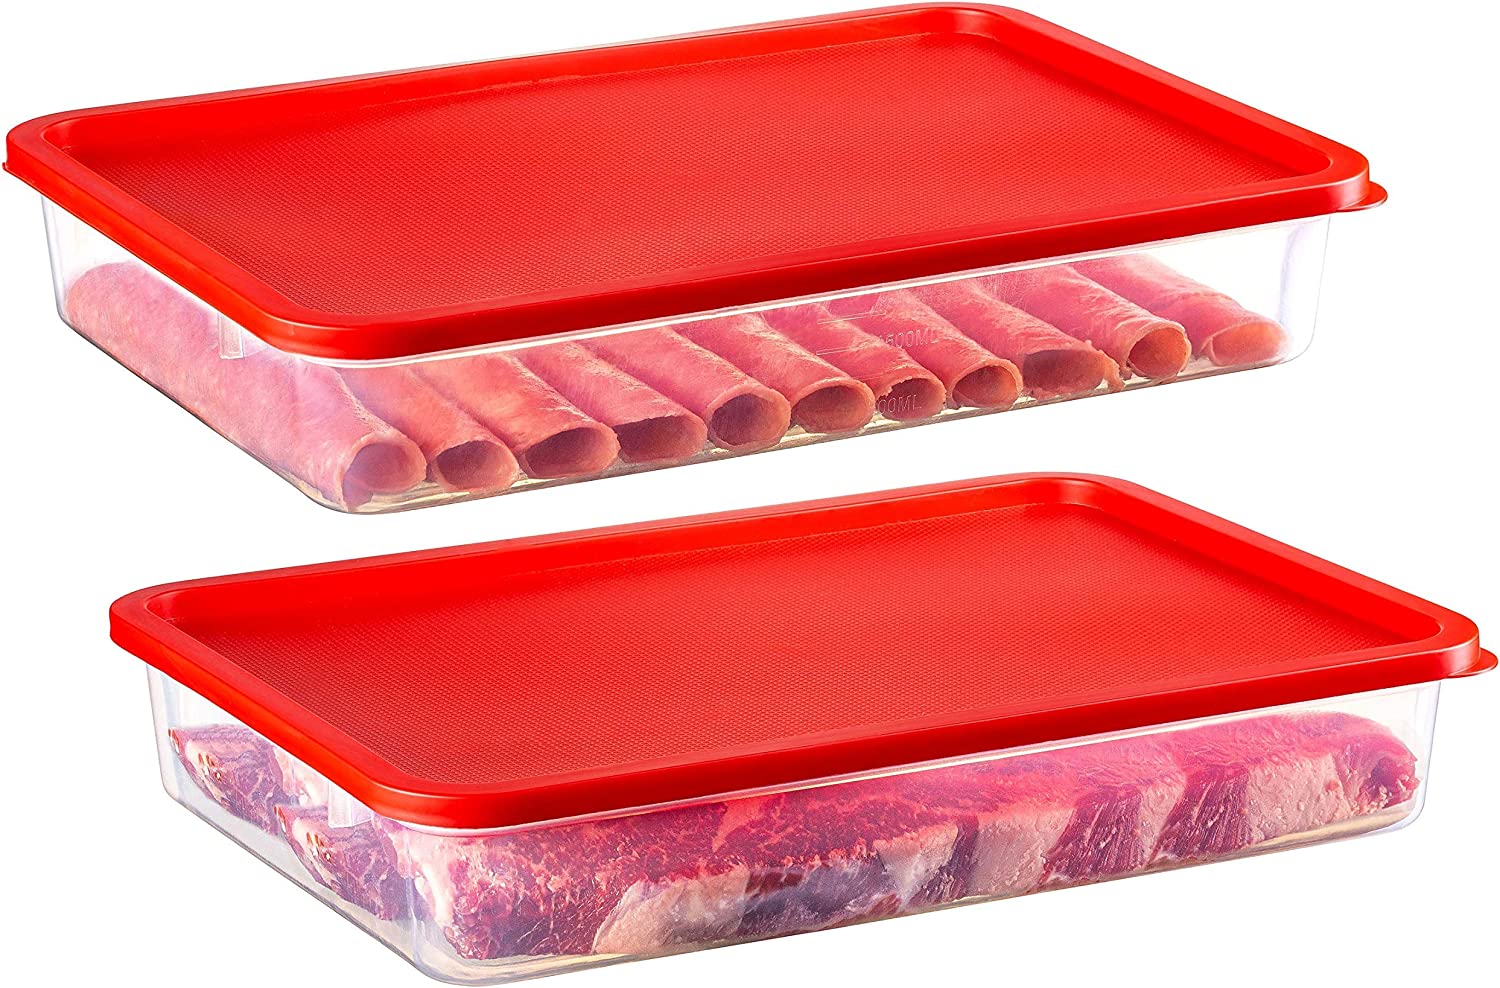 2 Pack – Zilpoo Plastic Bacon Keeper, Deli Meat Saver Cold Cuts Cheese Food Storage Container with Lid for Refrigerator, Shallow Low Profile Christmas Cookie Holder, 84 oz.